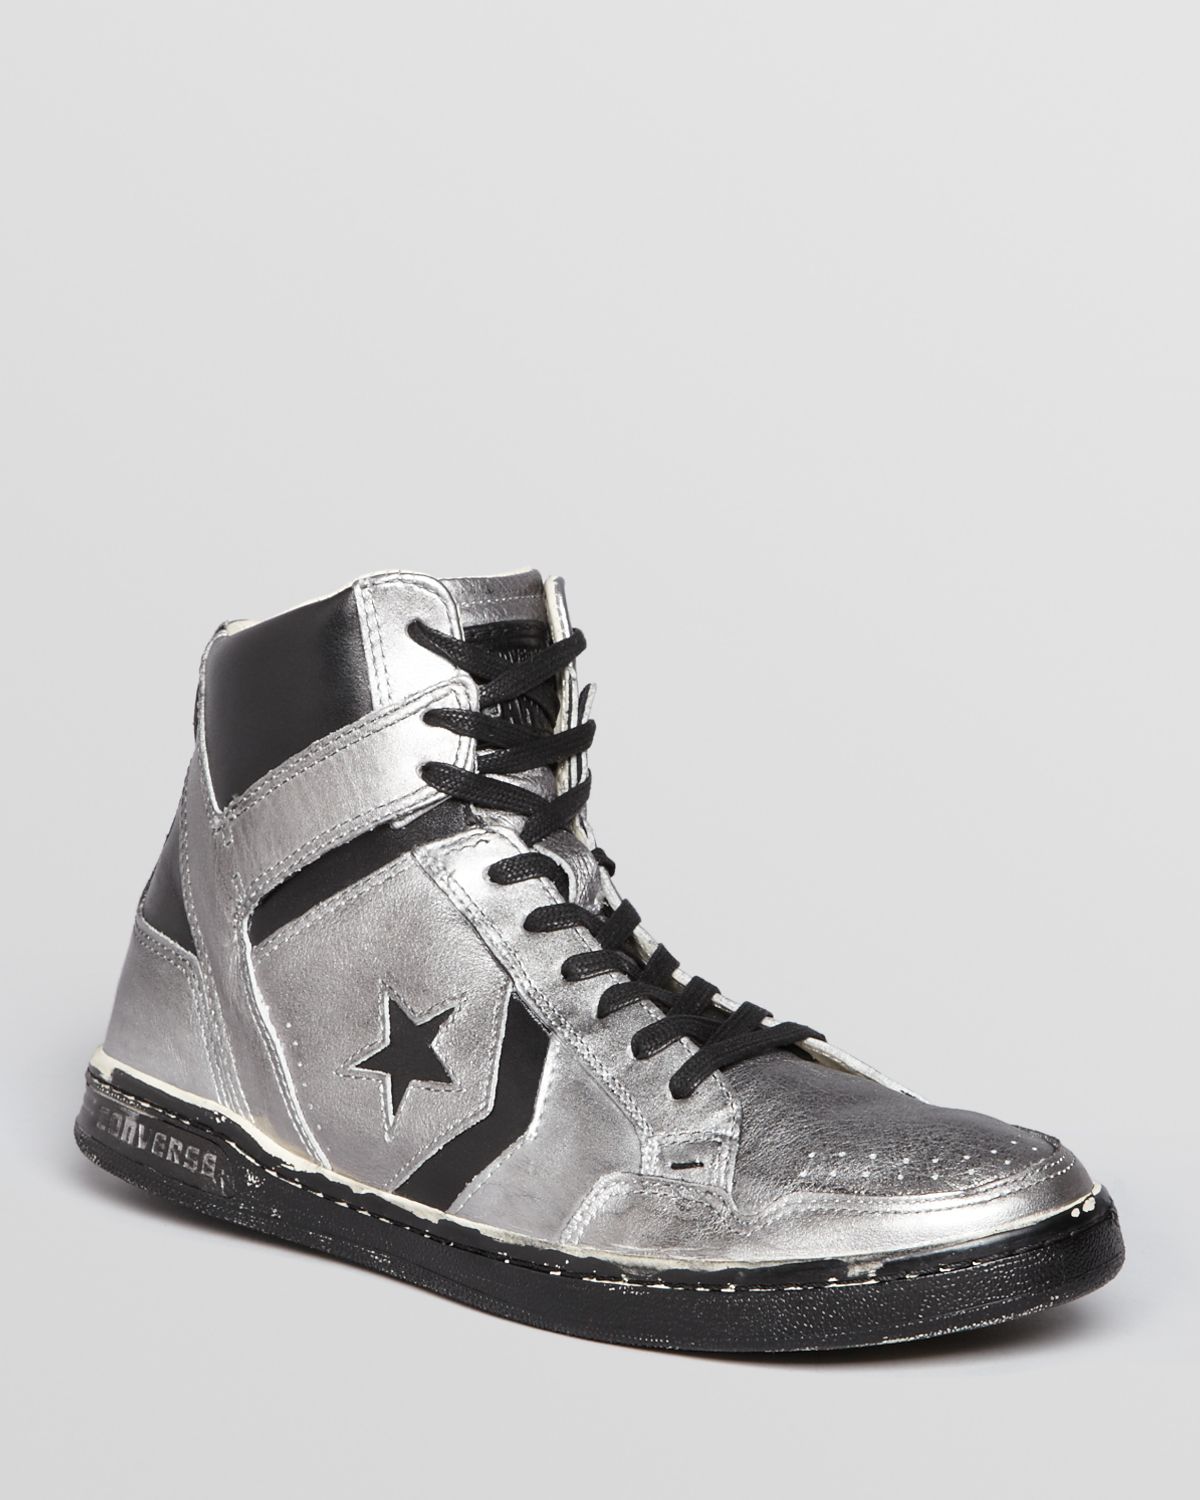 Converse By John Varvatos Weapon Metallic Leather High Top Sneakers for Men  | Lyst